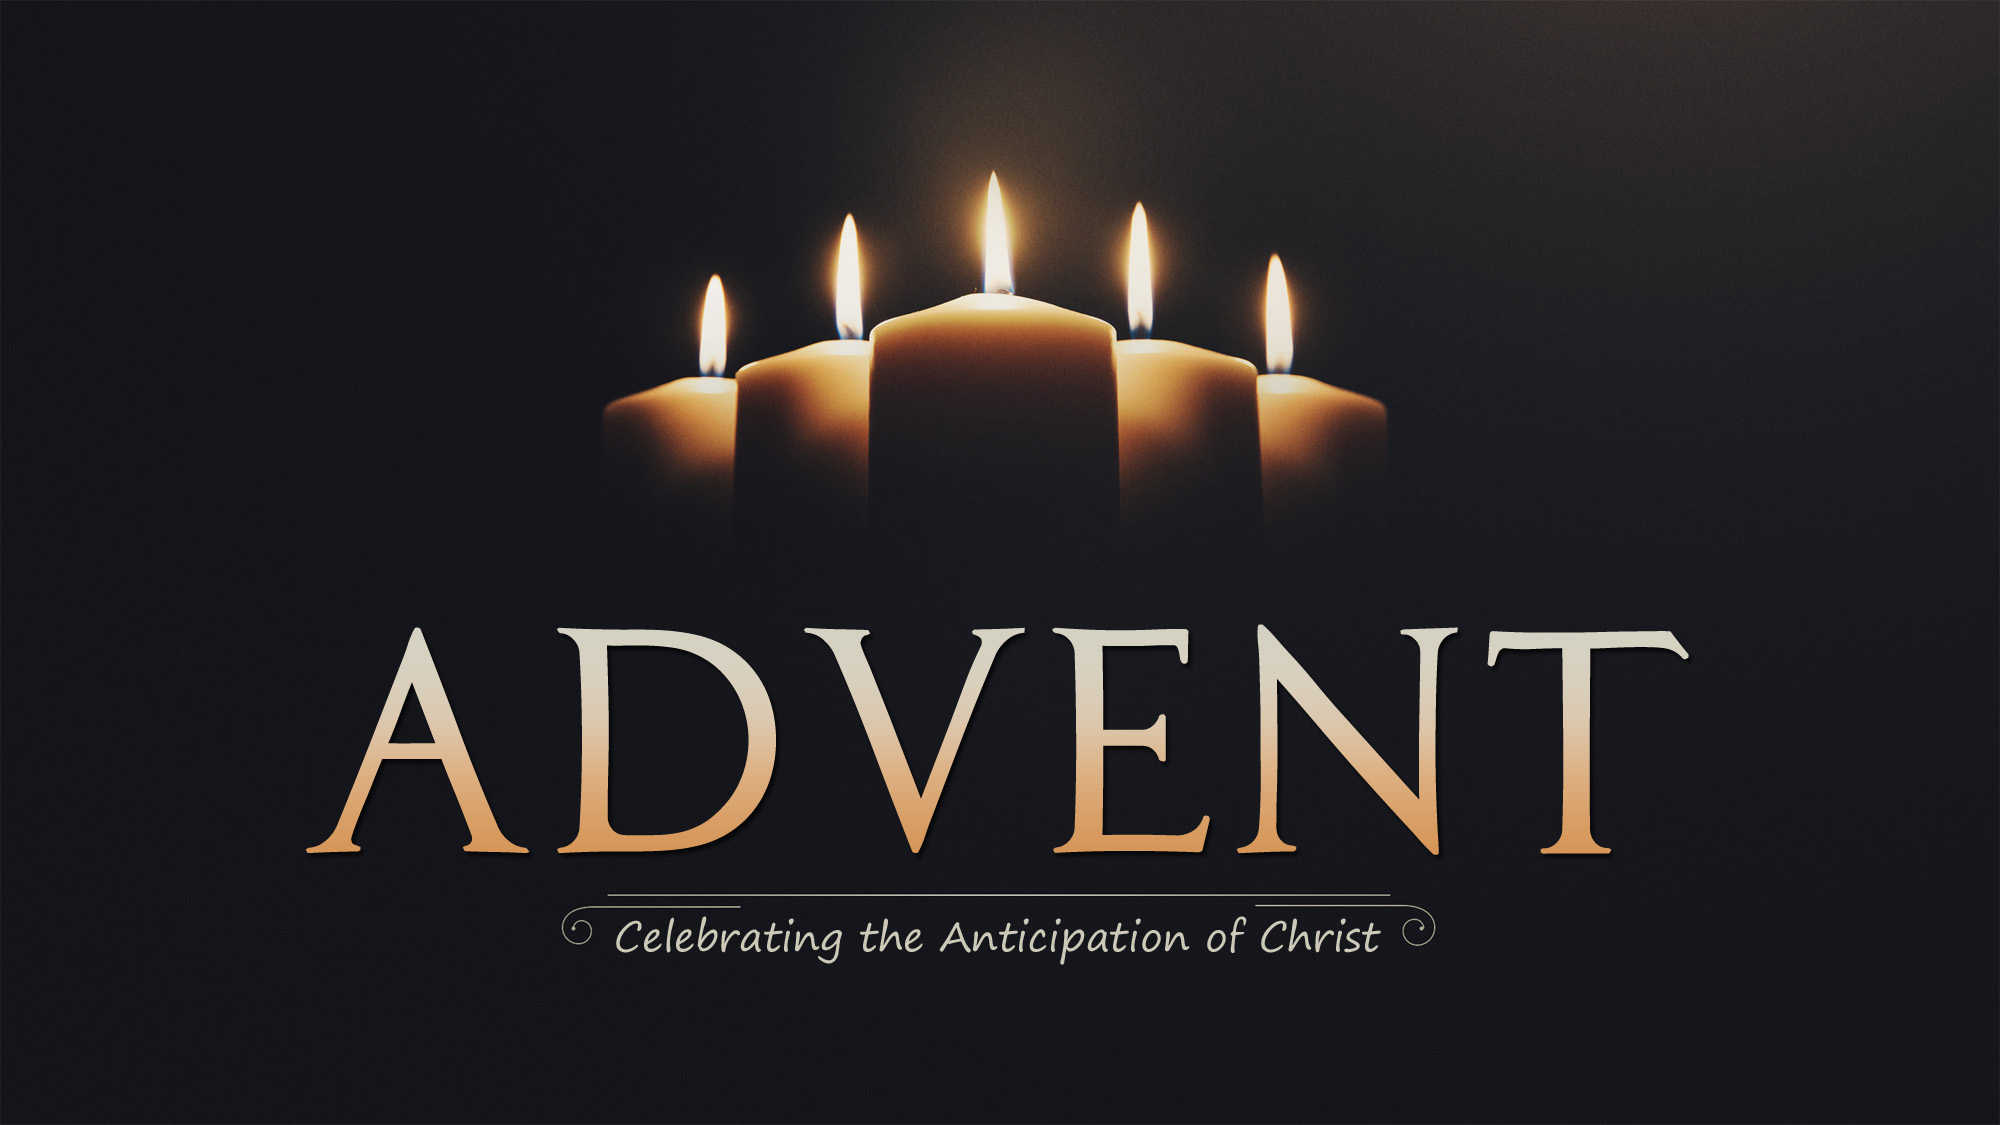 Reflecting on the advent of Christ: Thoughts for Parents, Children and Christmas